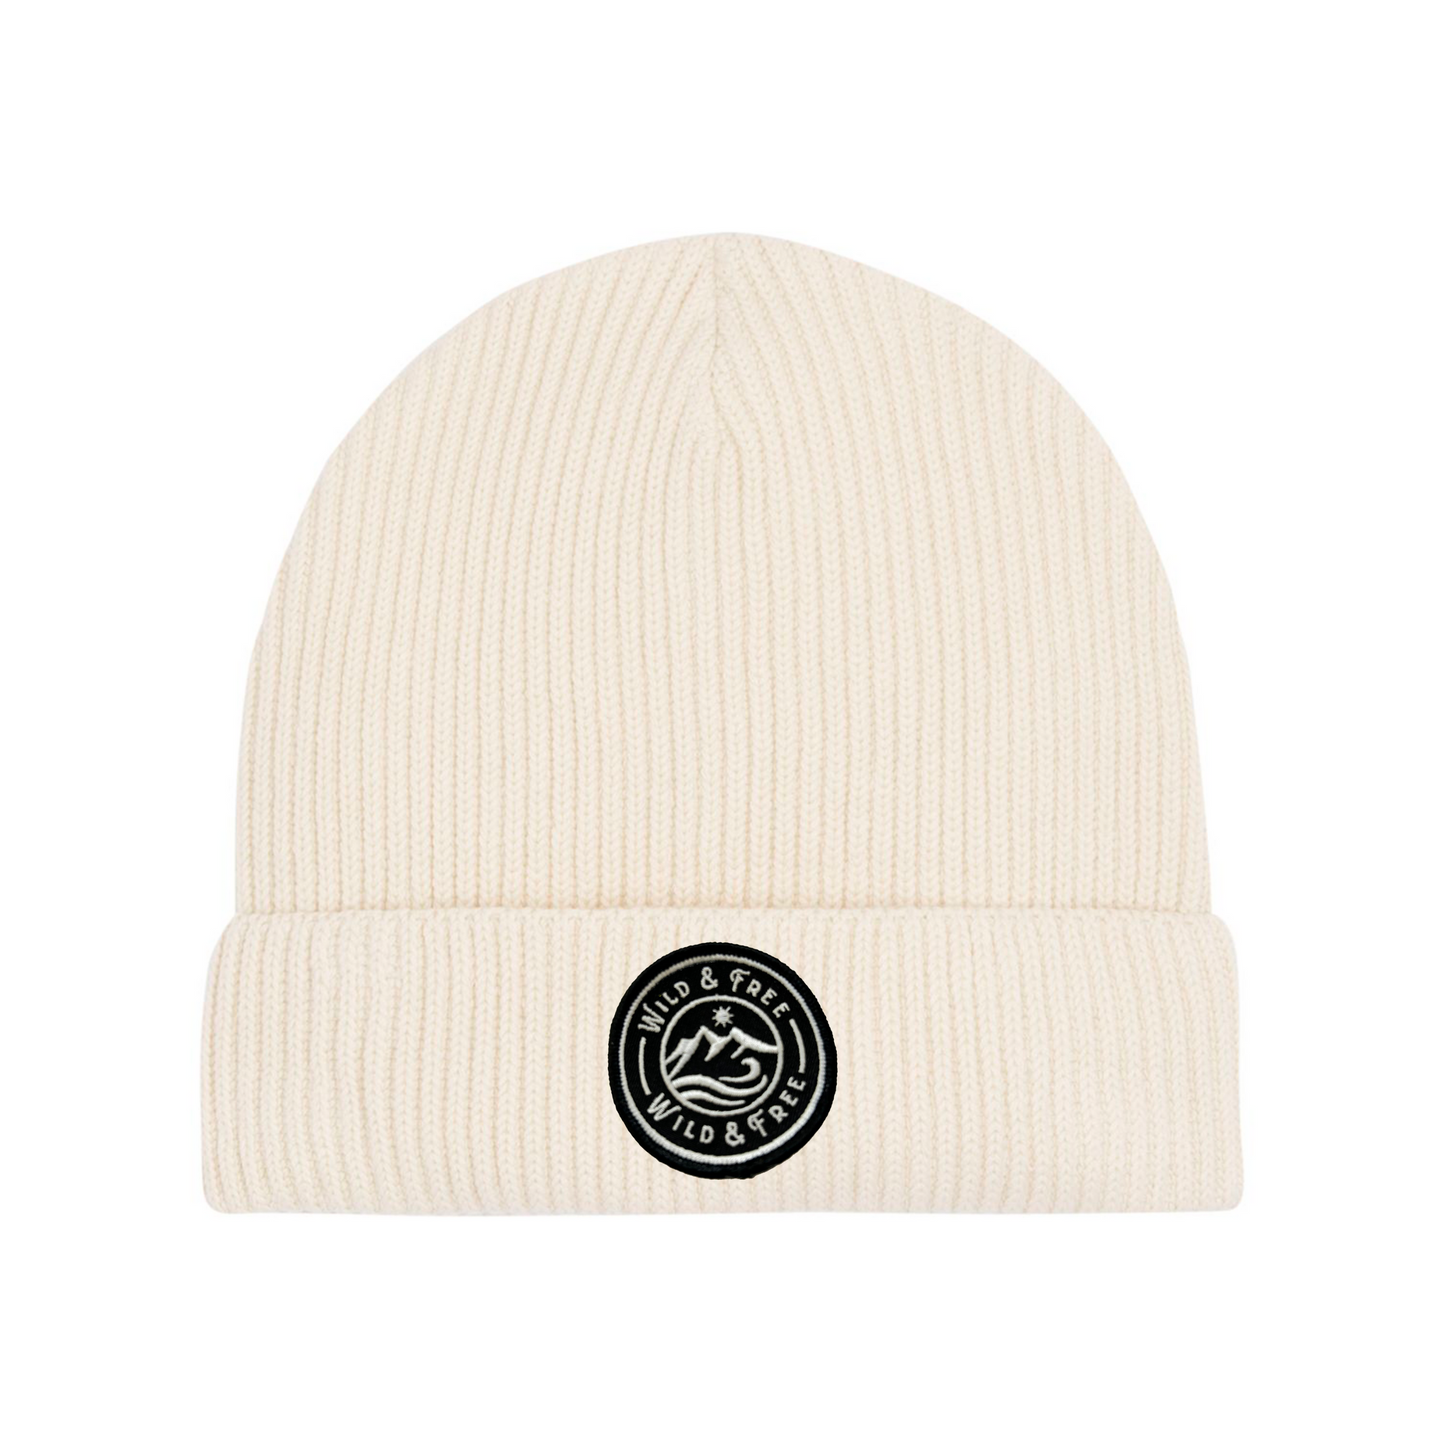 The Classic Simply Raw Beanie